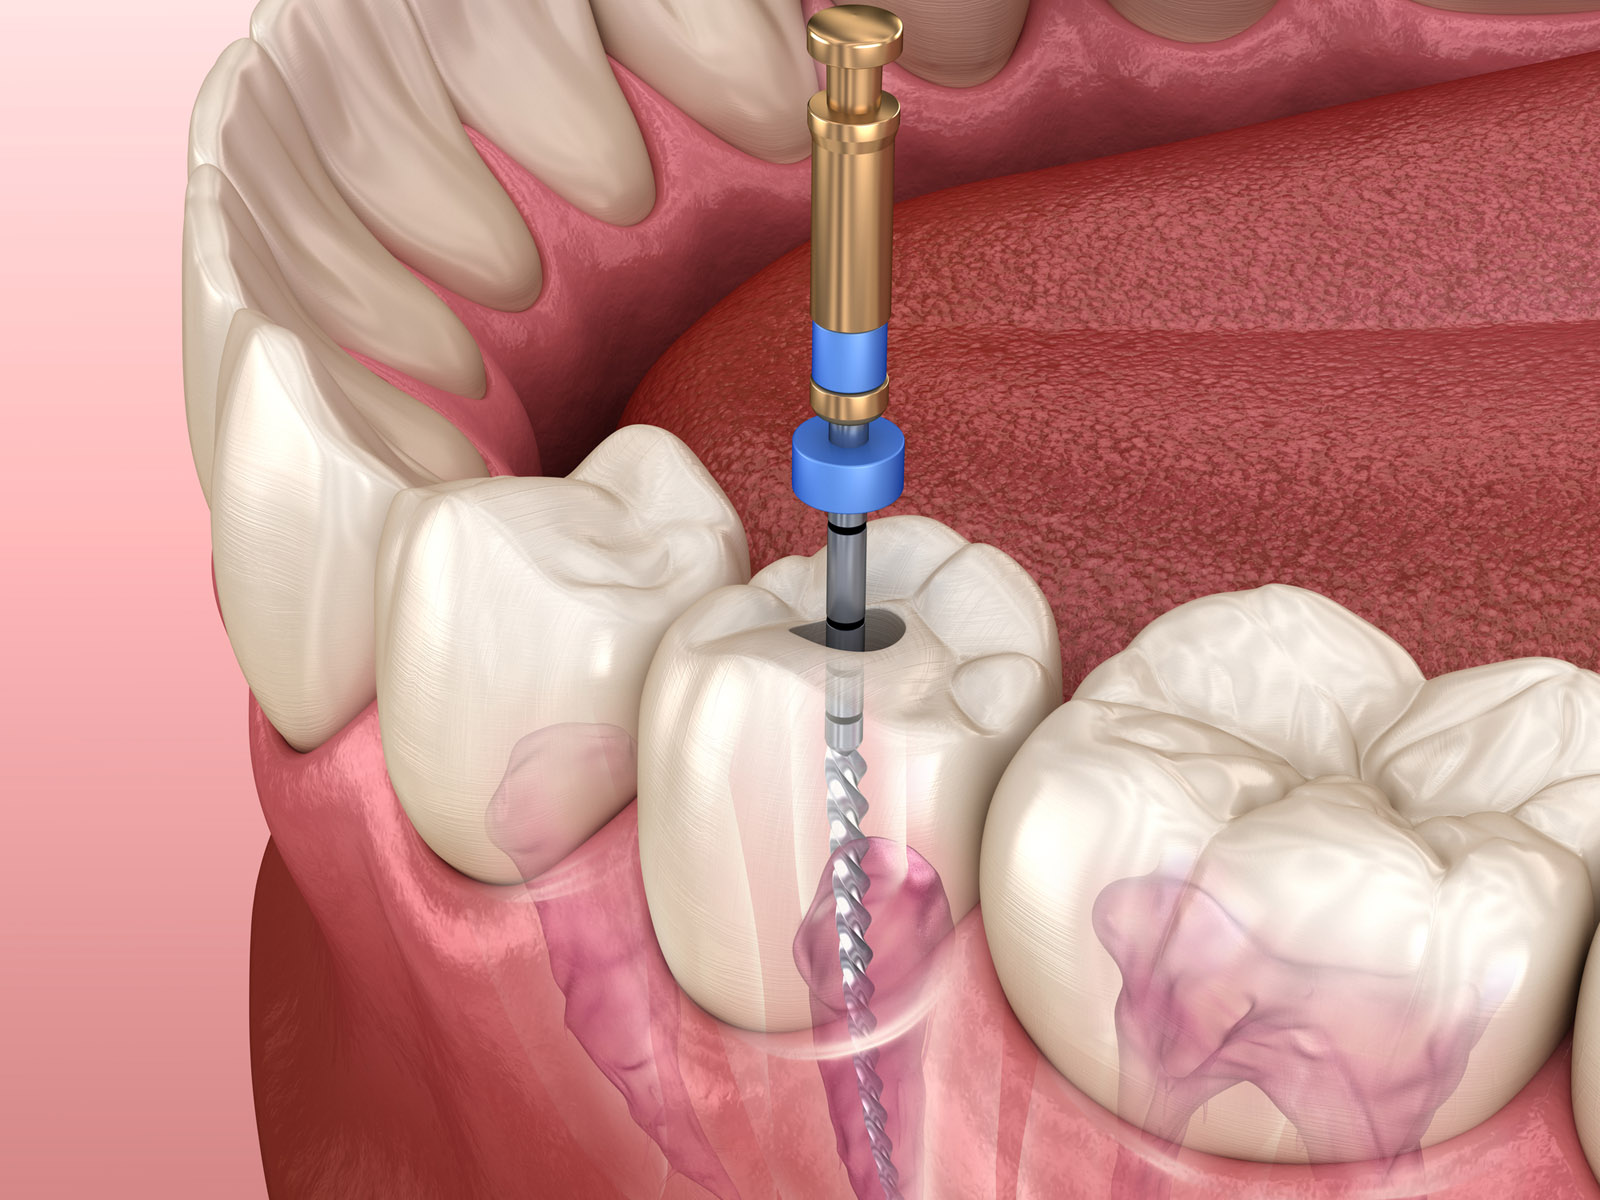 Does a Root Canal Hurt?